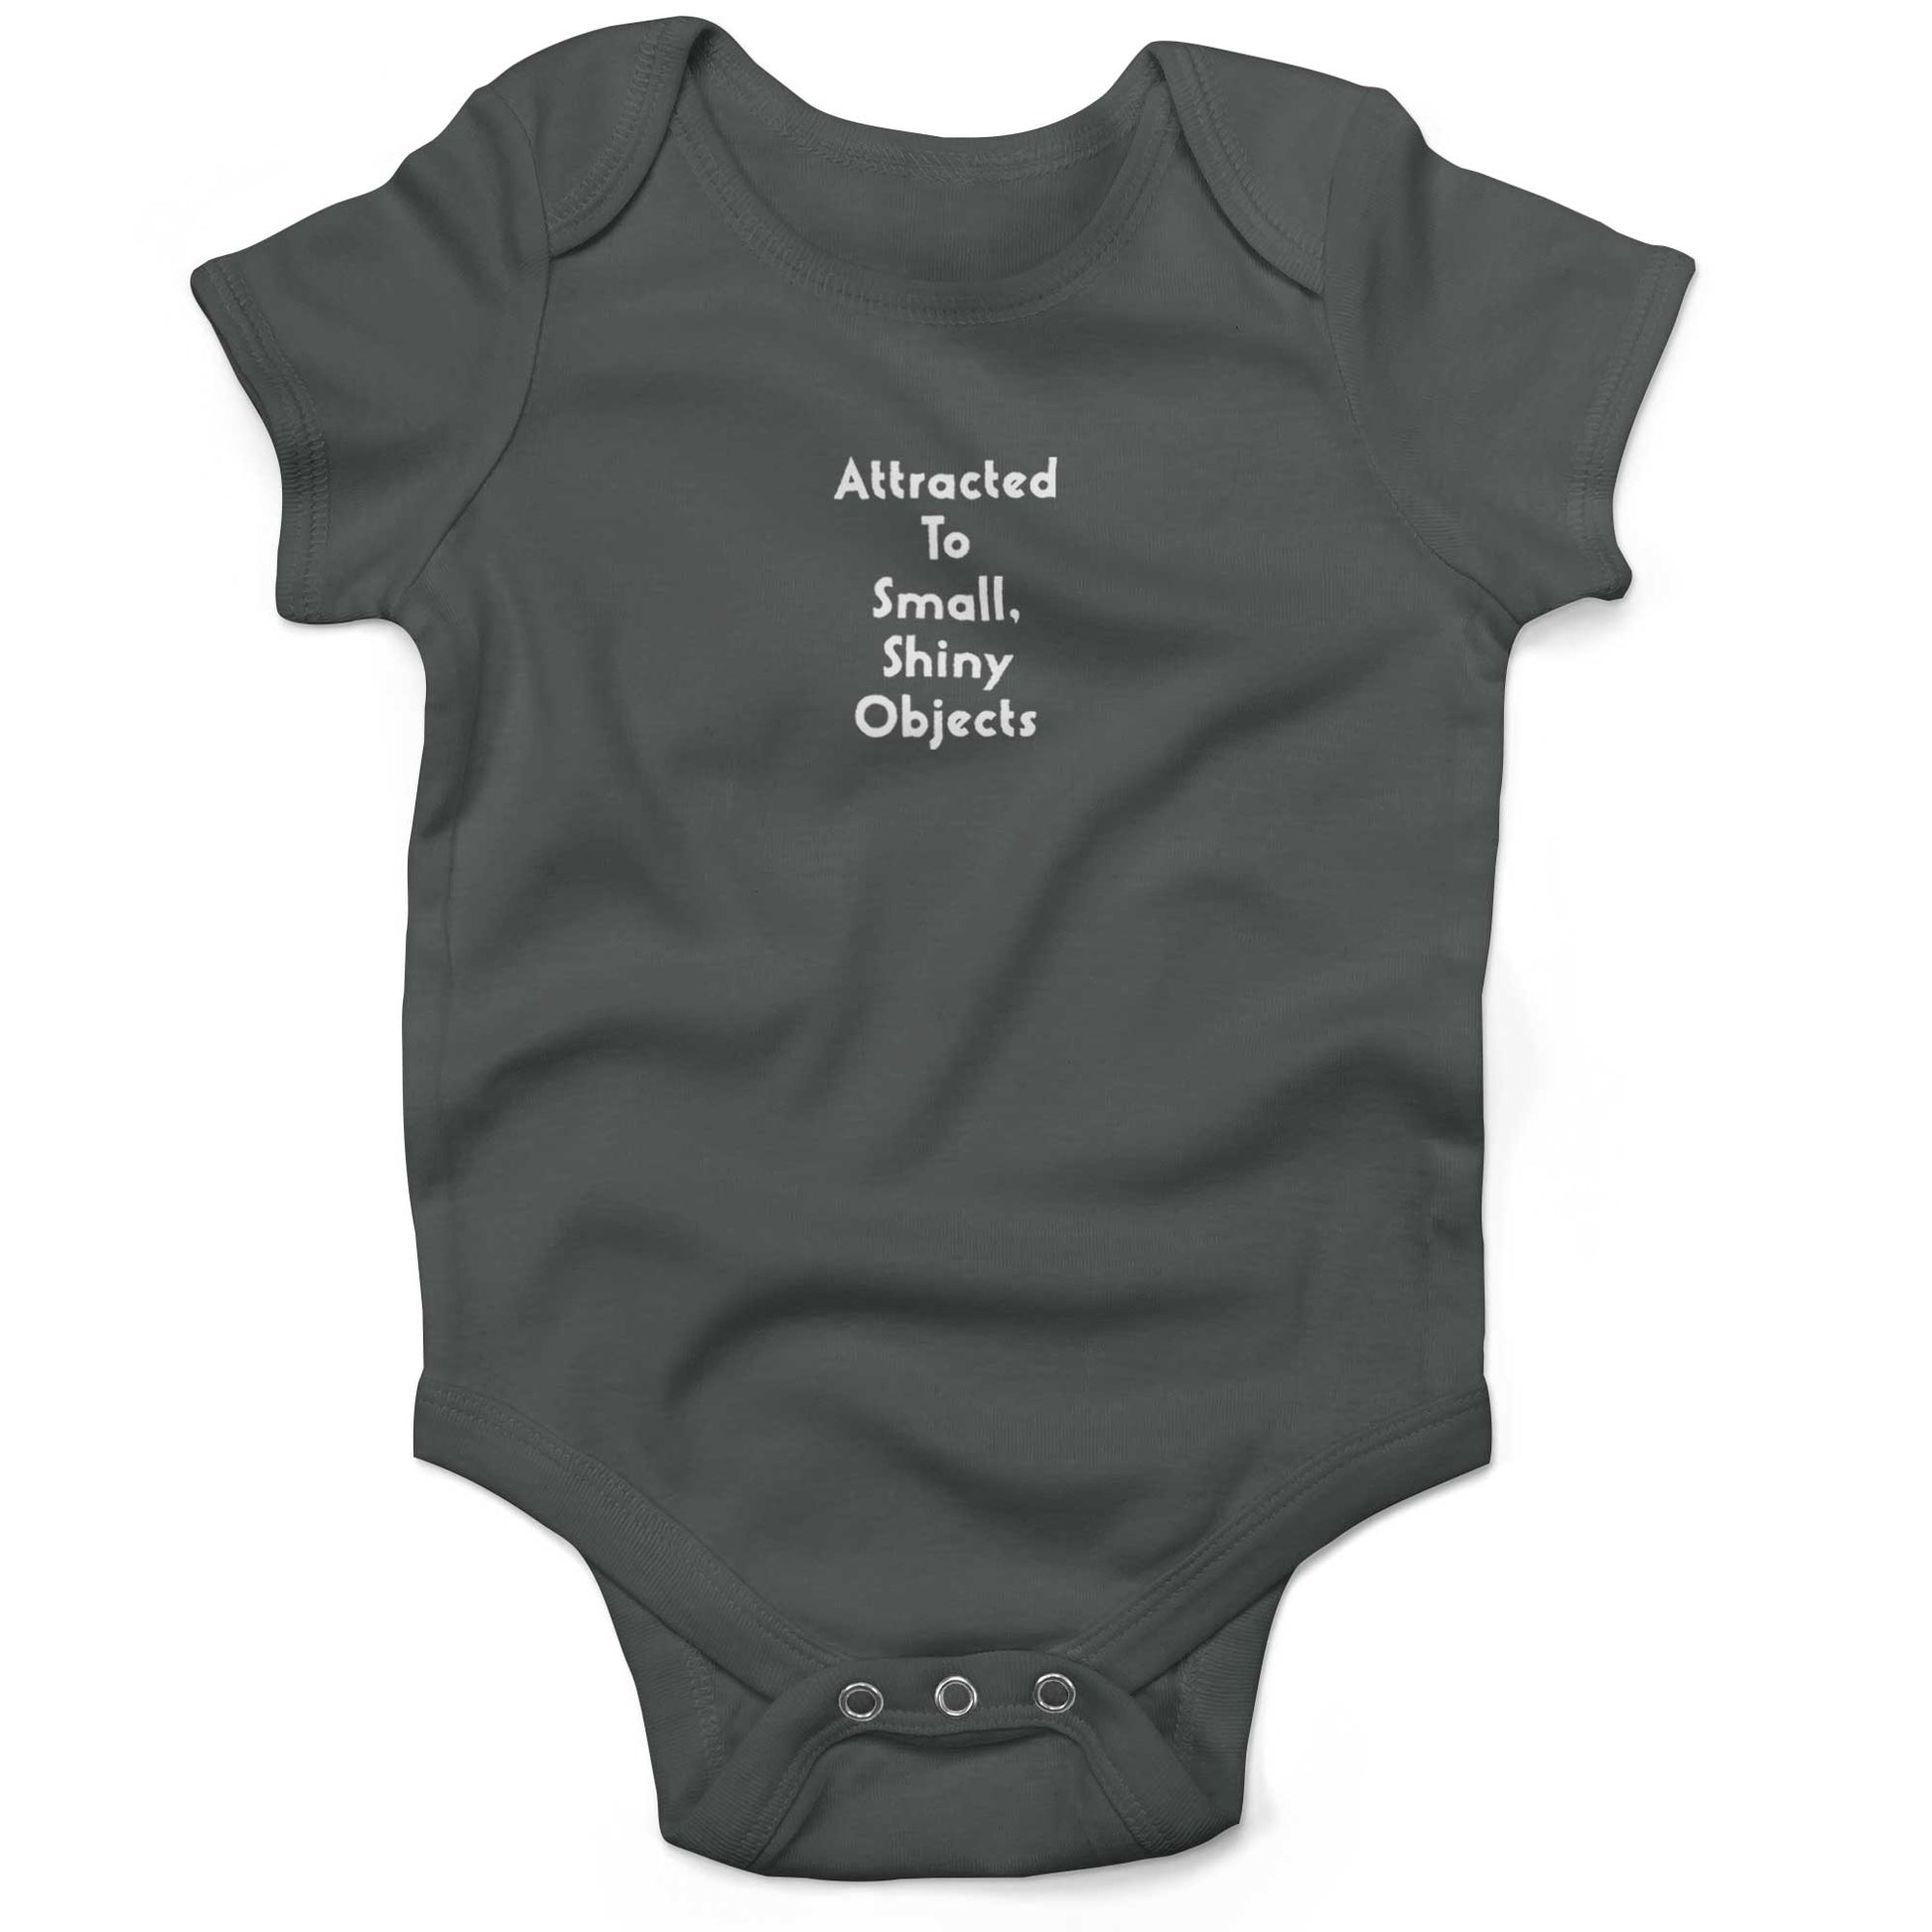 Attracted To Small, Shiny Objects Baby One Piece-Organic Asphalt-3-6 months